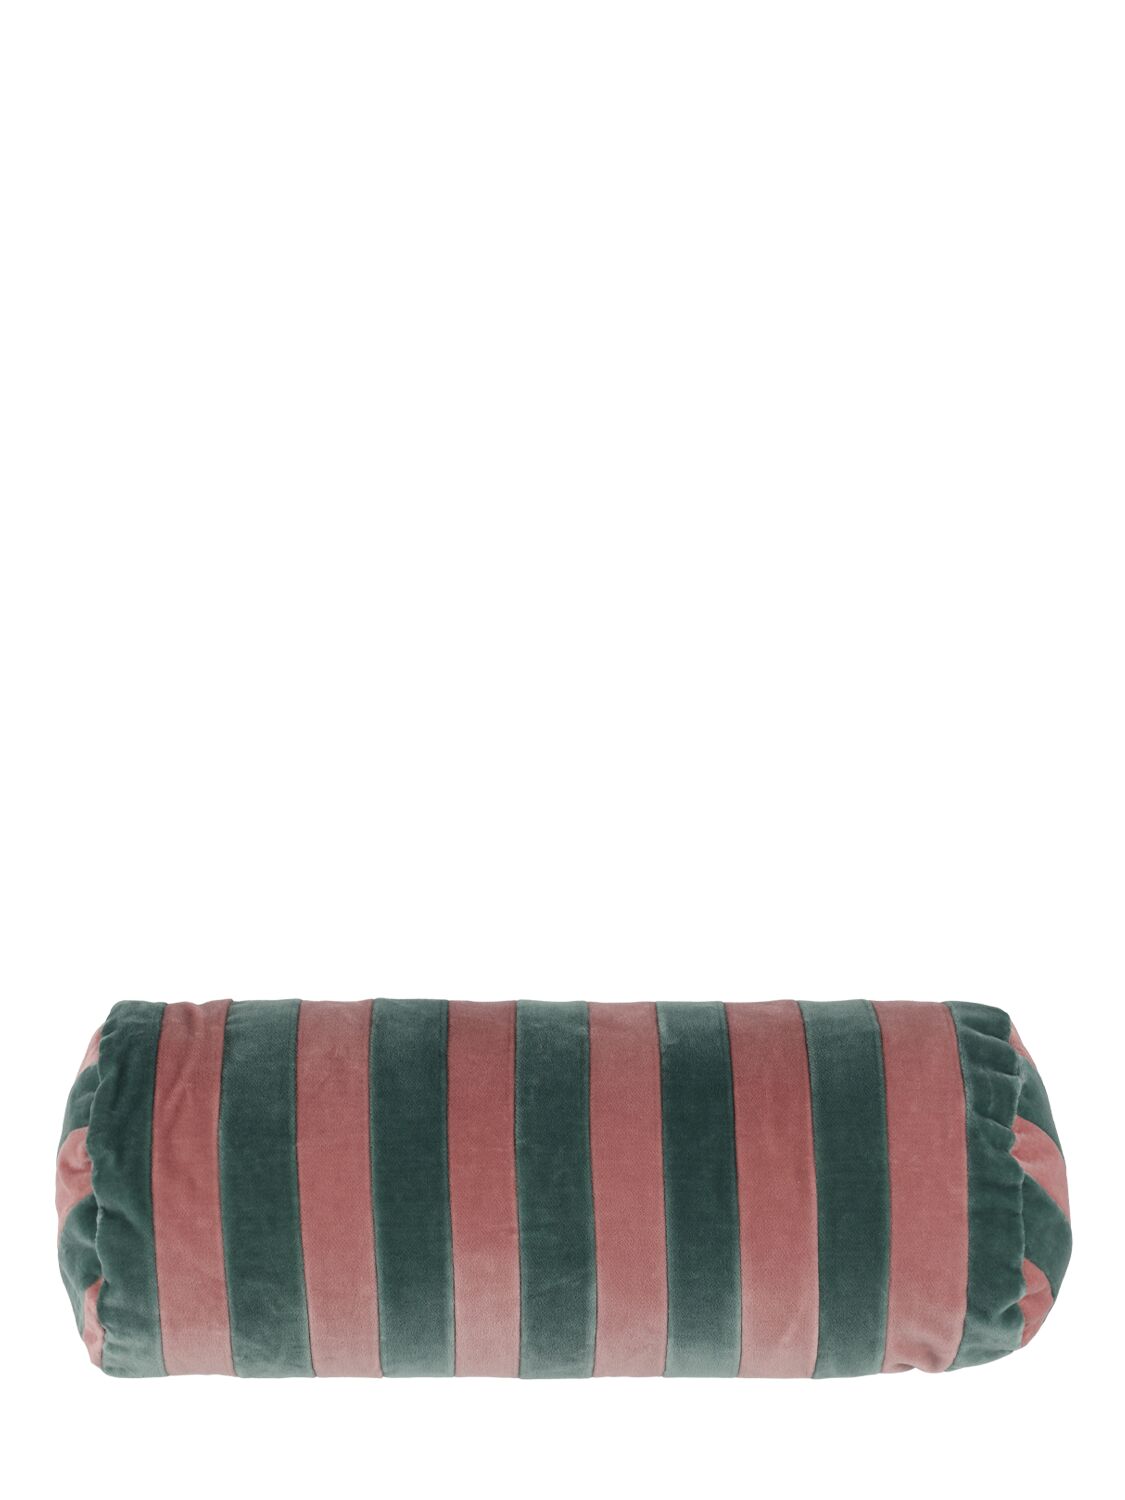 Christina Lundsteen Striped Bolster Cushion In Pink